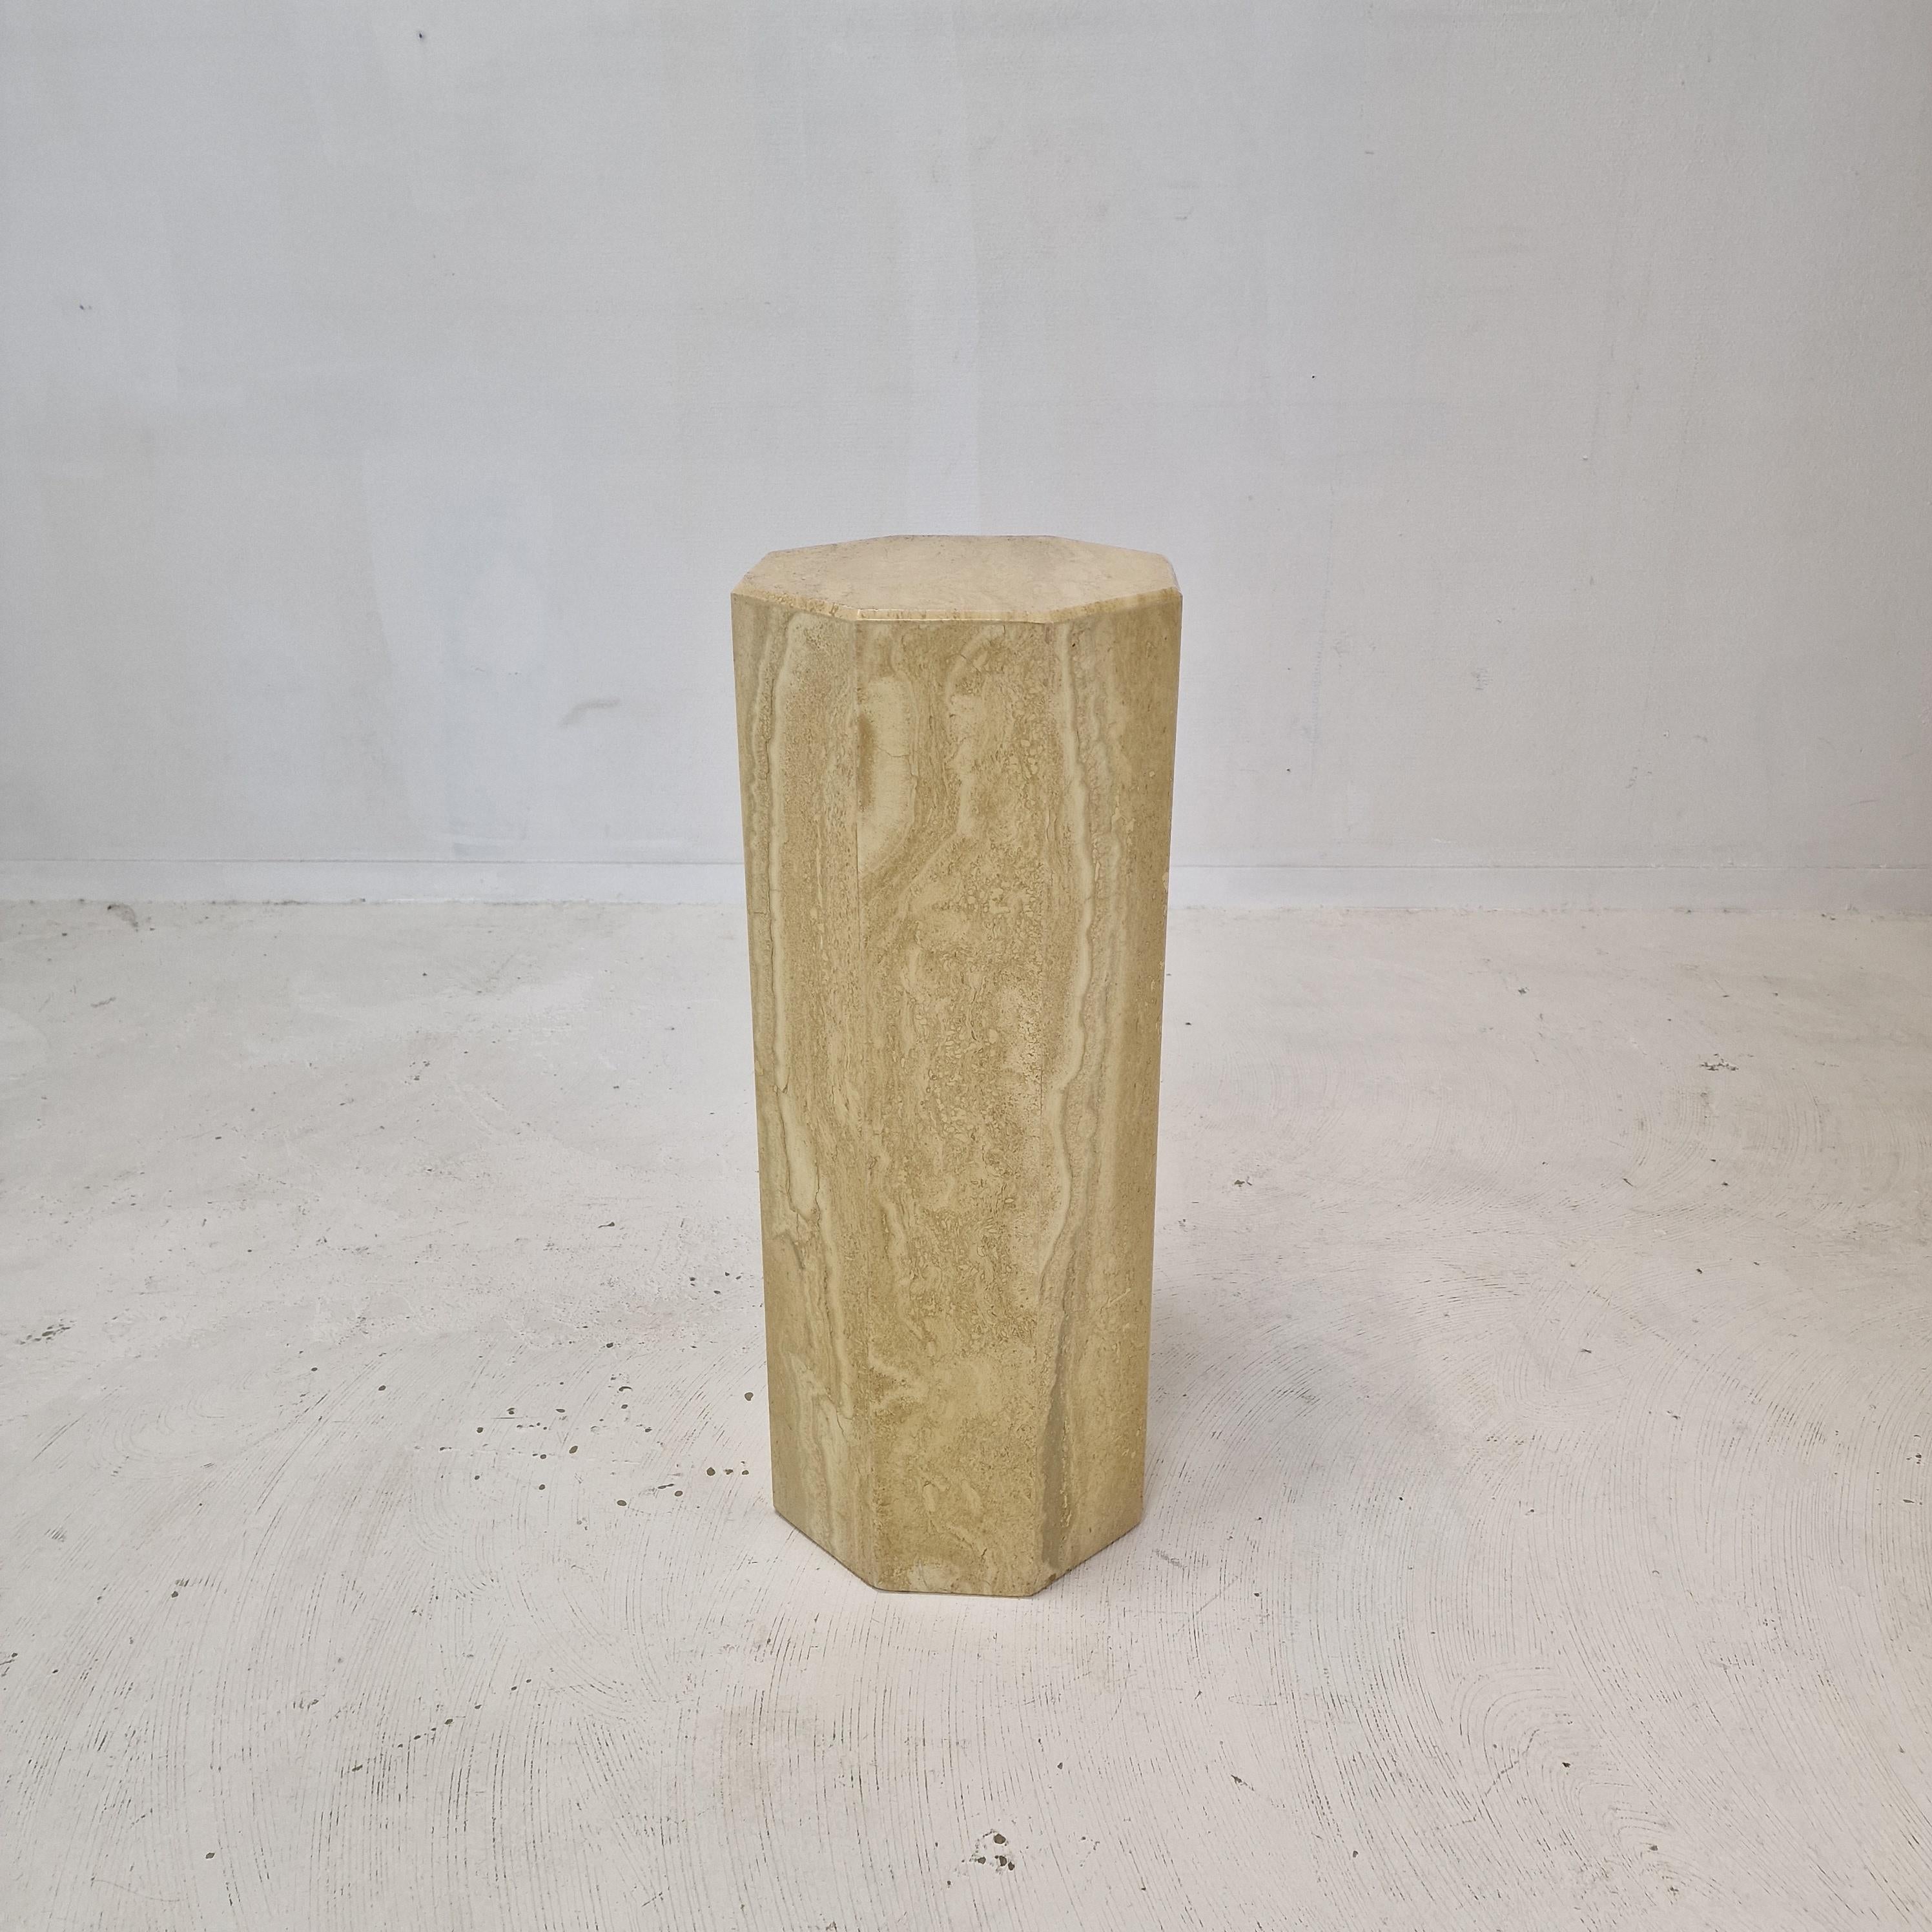 Italian pedestal or side table, handcrafted out of travertine, fabricated in the 80's.
It can be used inside or outside the house.

It is made of beautiful travertine.
Please take notice of the very nice patterns.

We work with professional